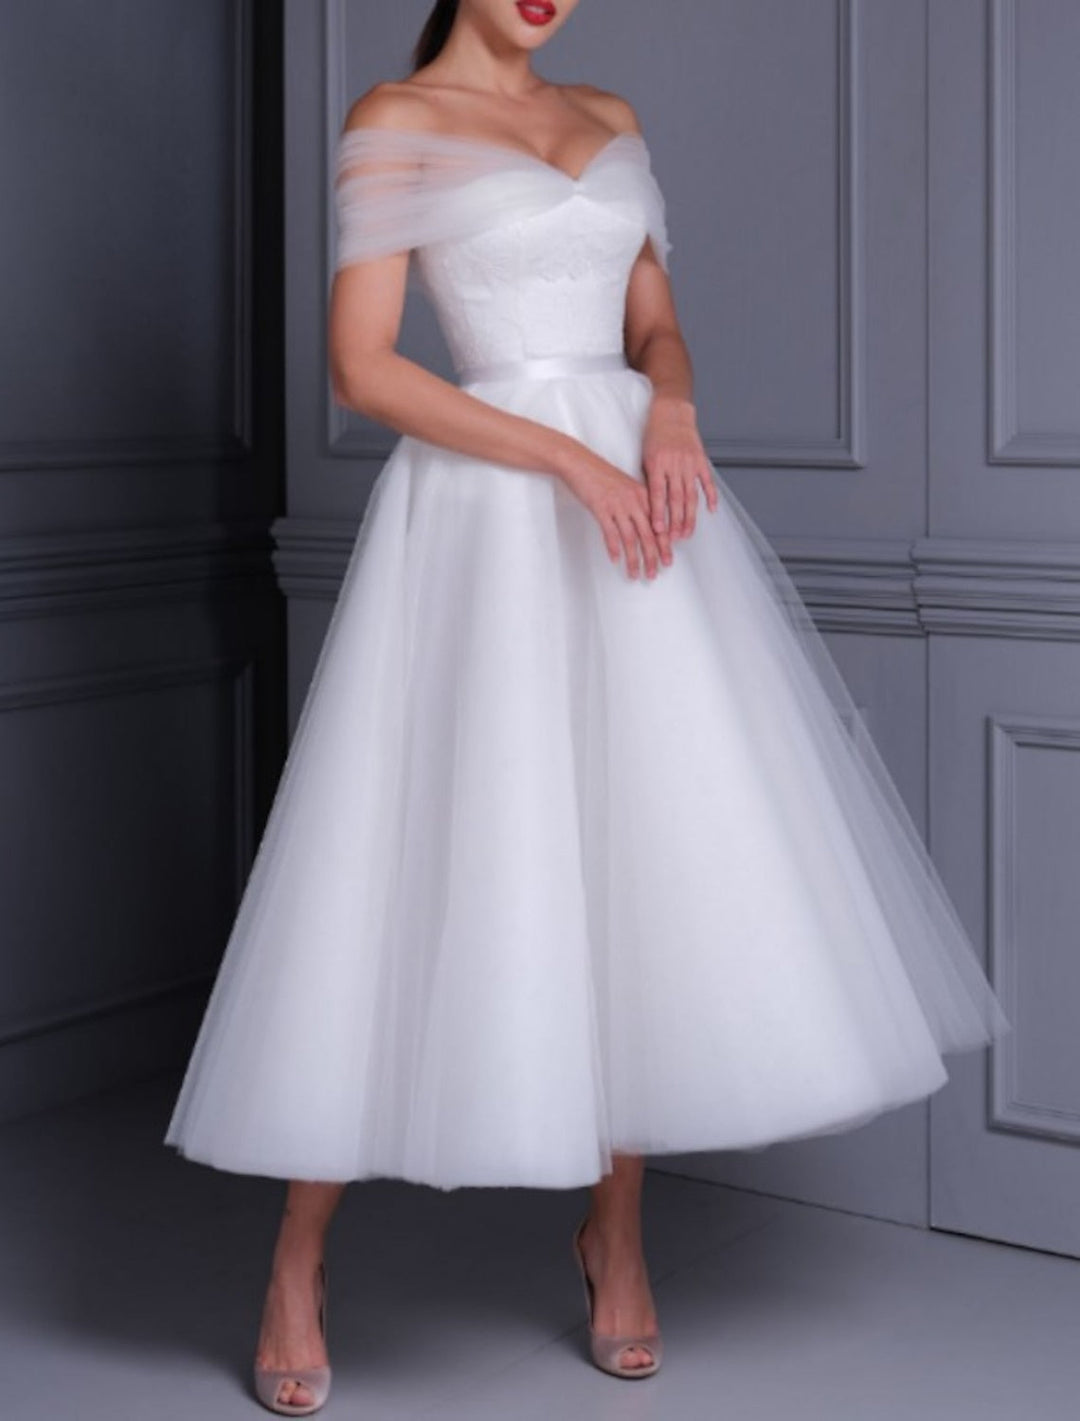 Ball Gown Off-the-Shoulder Tea-length Lace Wedding Dress